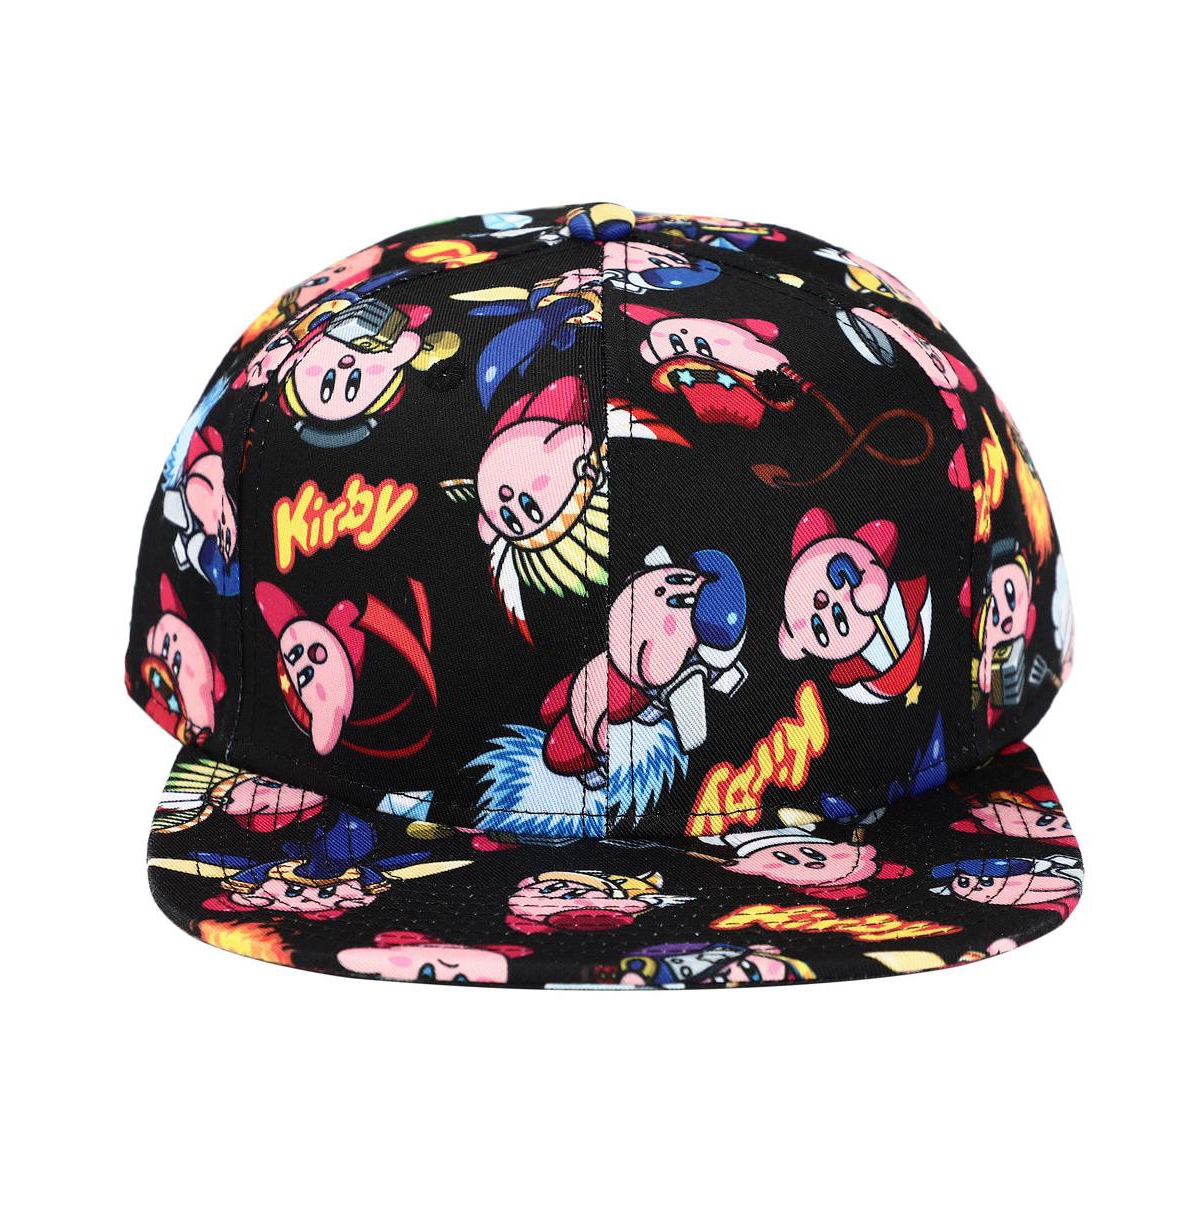 Men's Sublimated all Over print Flat Bill Snapback Hat - Multicolored